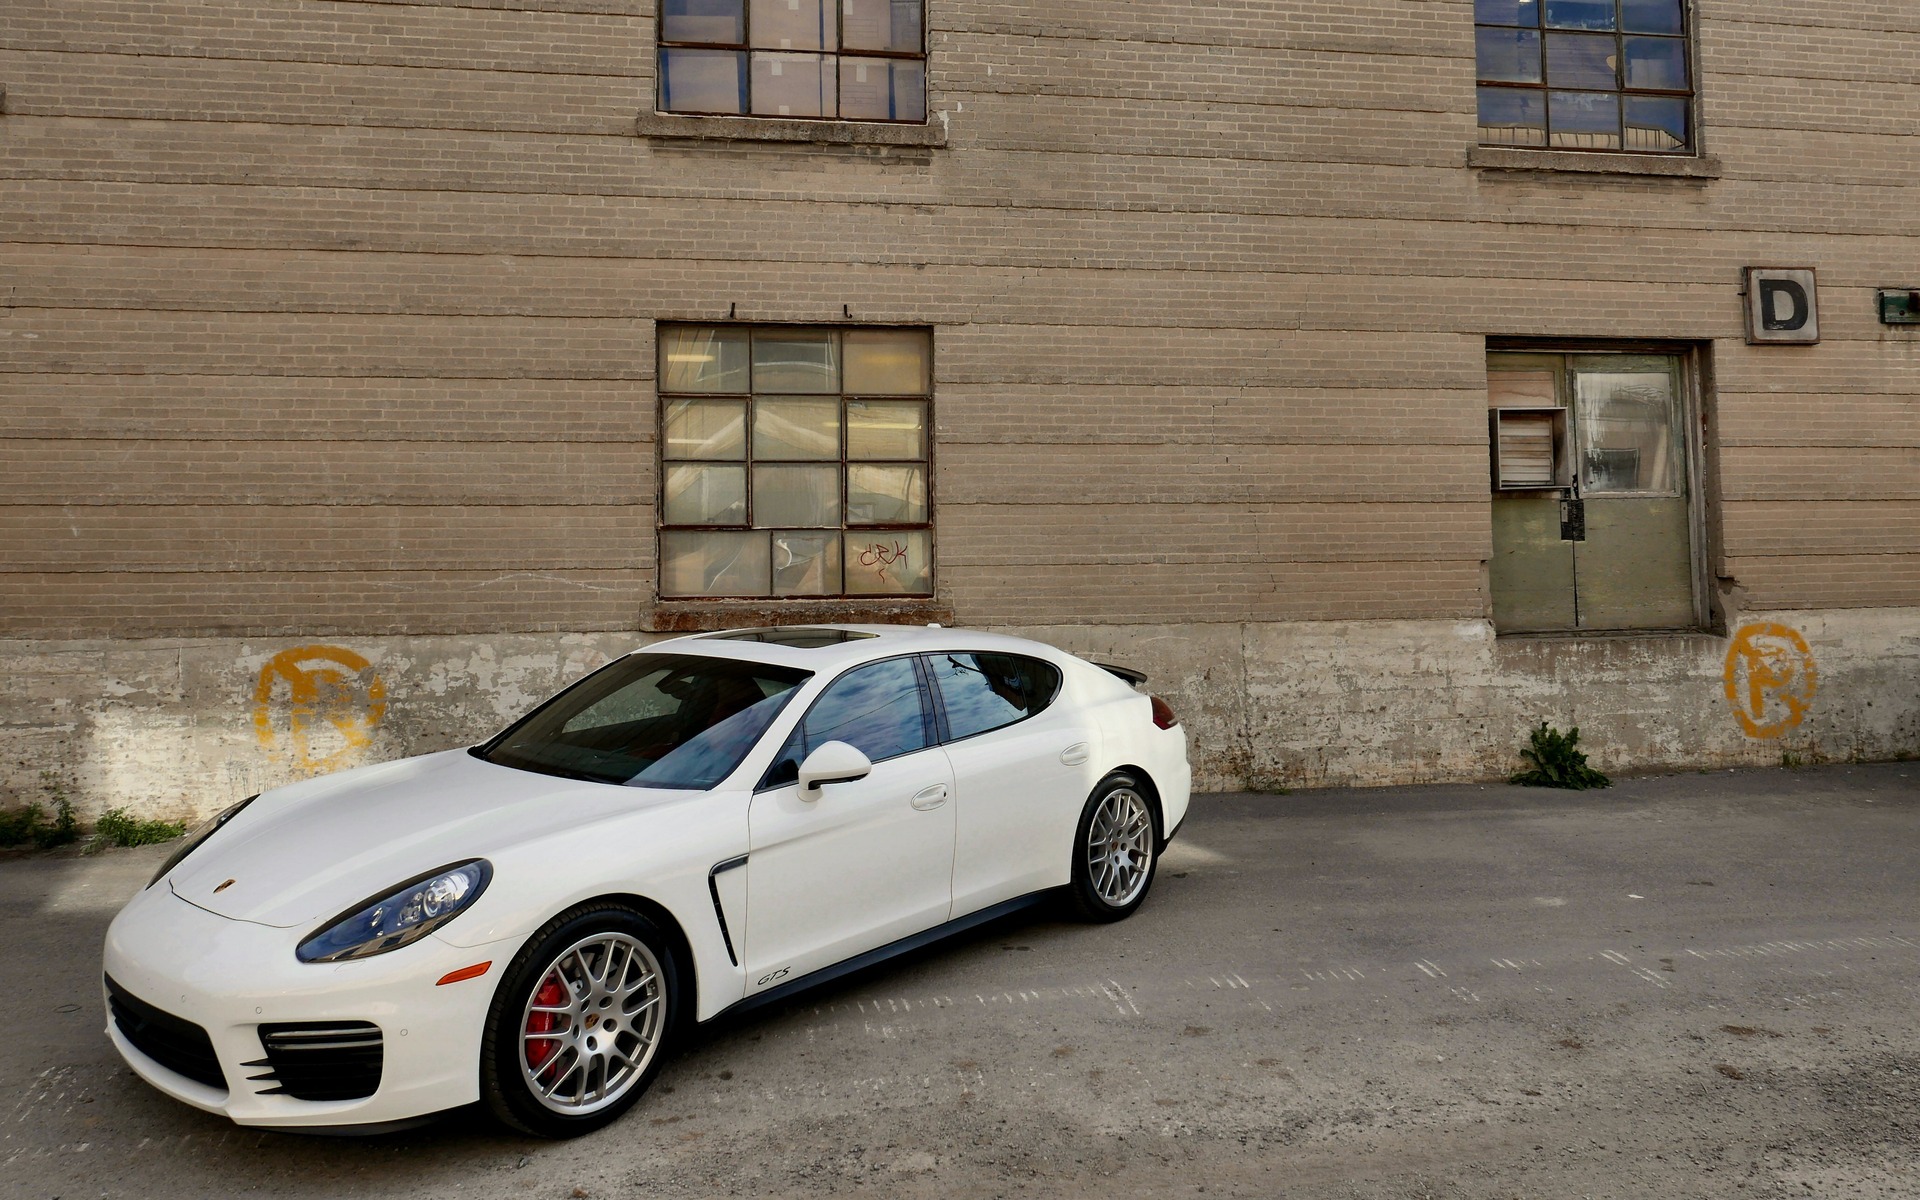 Even amongst its own, the Panamera stands out.